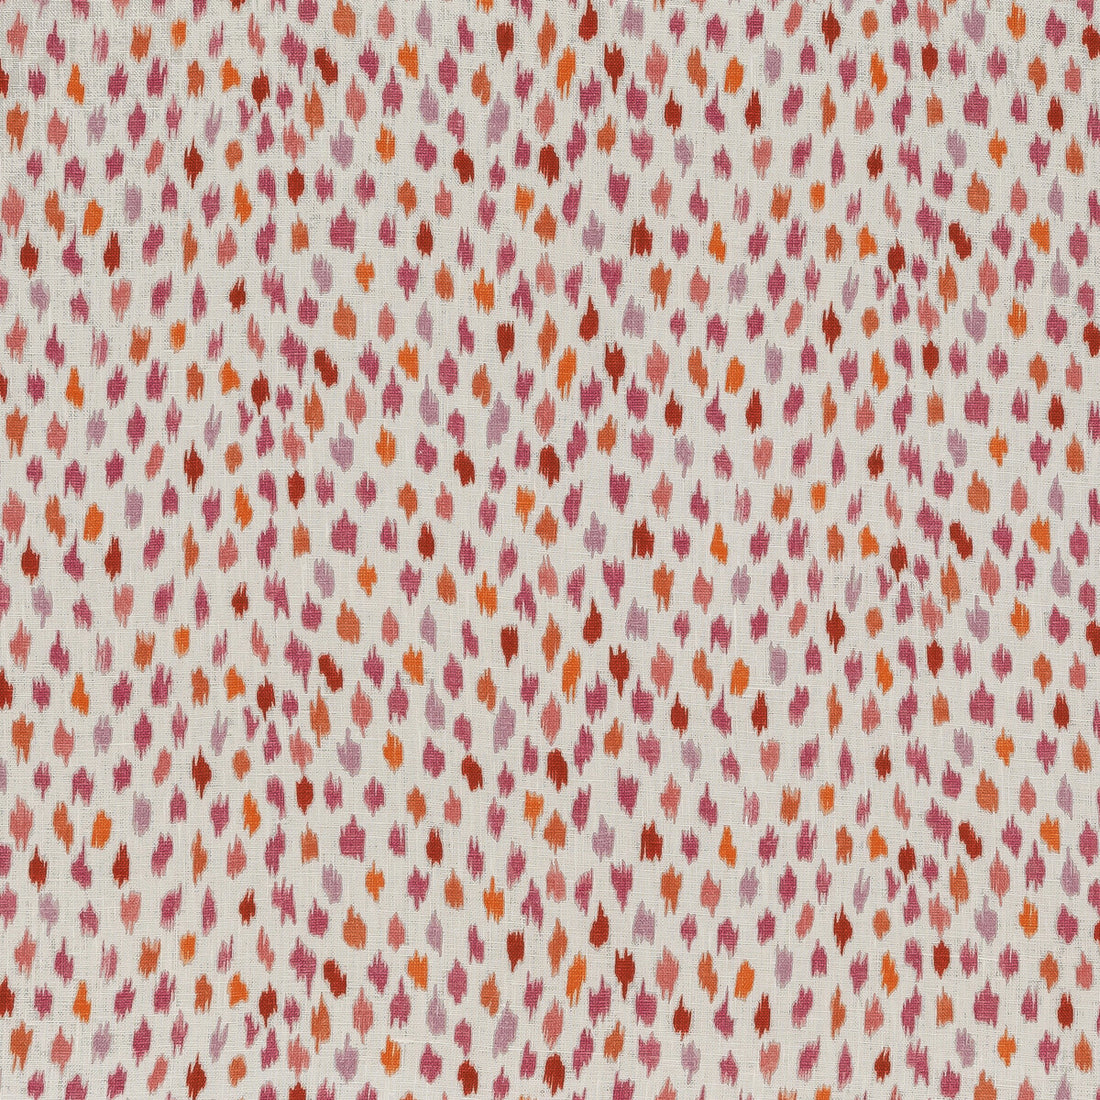 Cara fabric in pink/orange color - pattern BFC-3699.712.0 - by Lee Jofa in the Blithfield collection